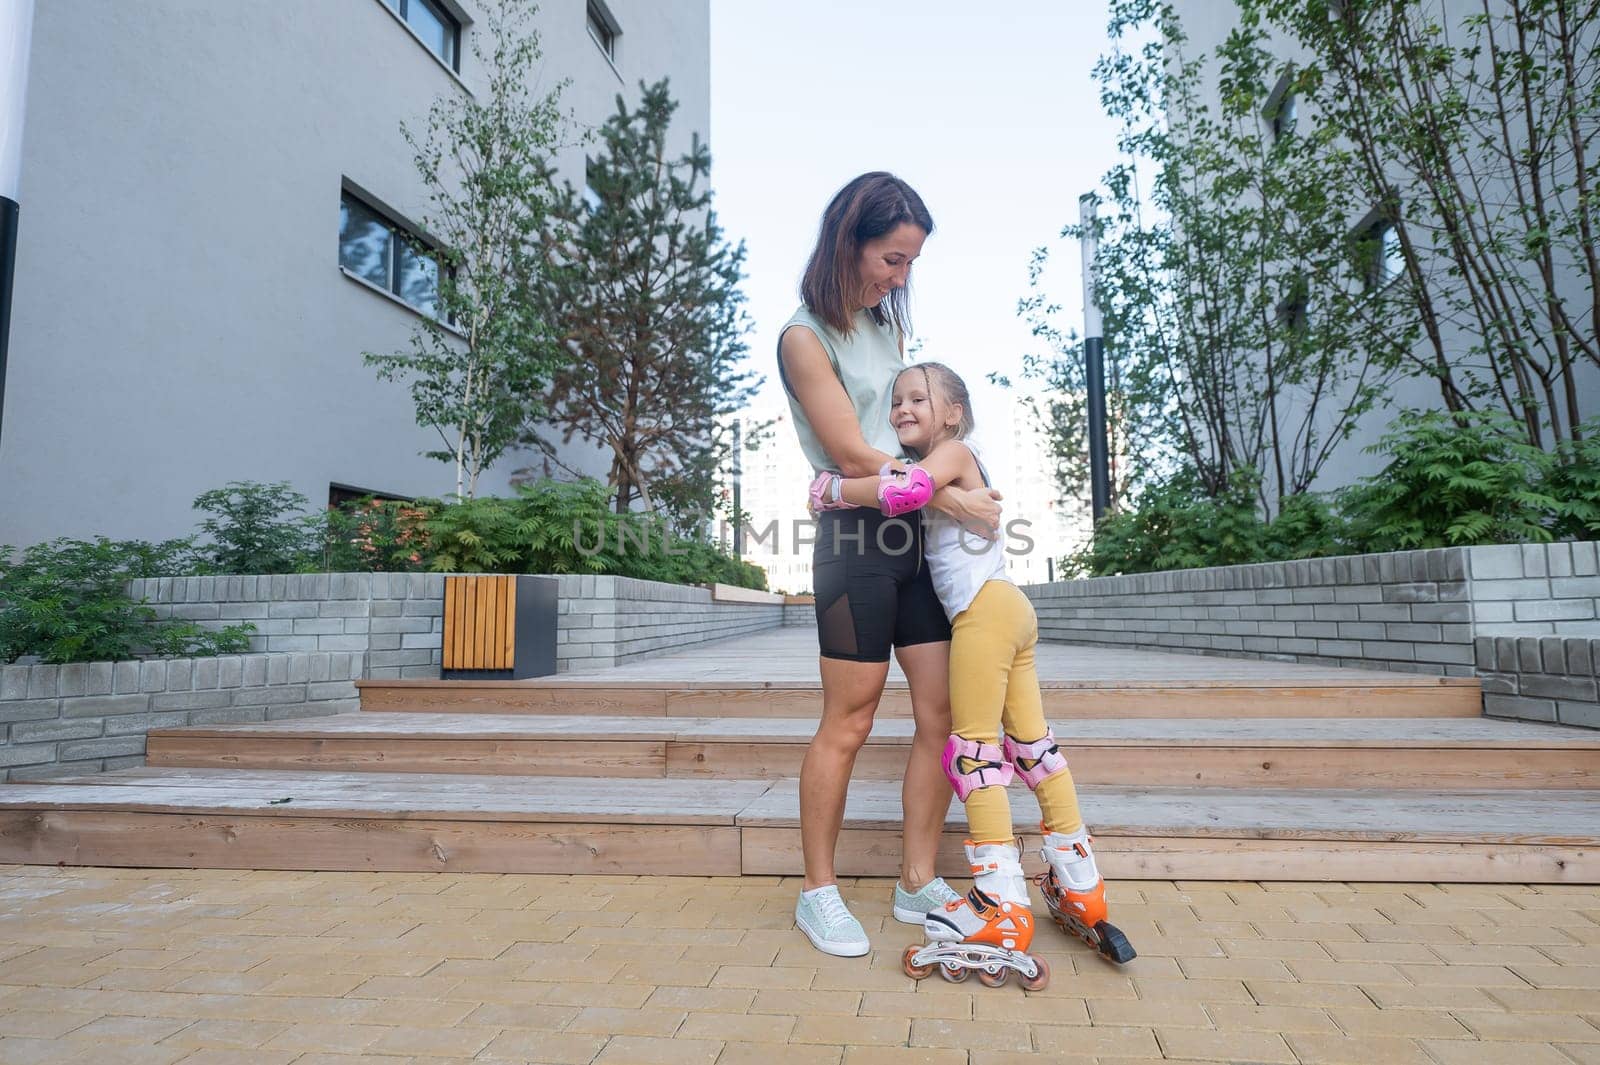 Mother helps daughter learn to roller skate